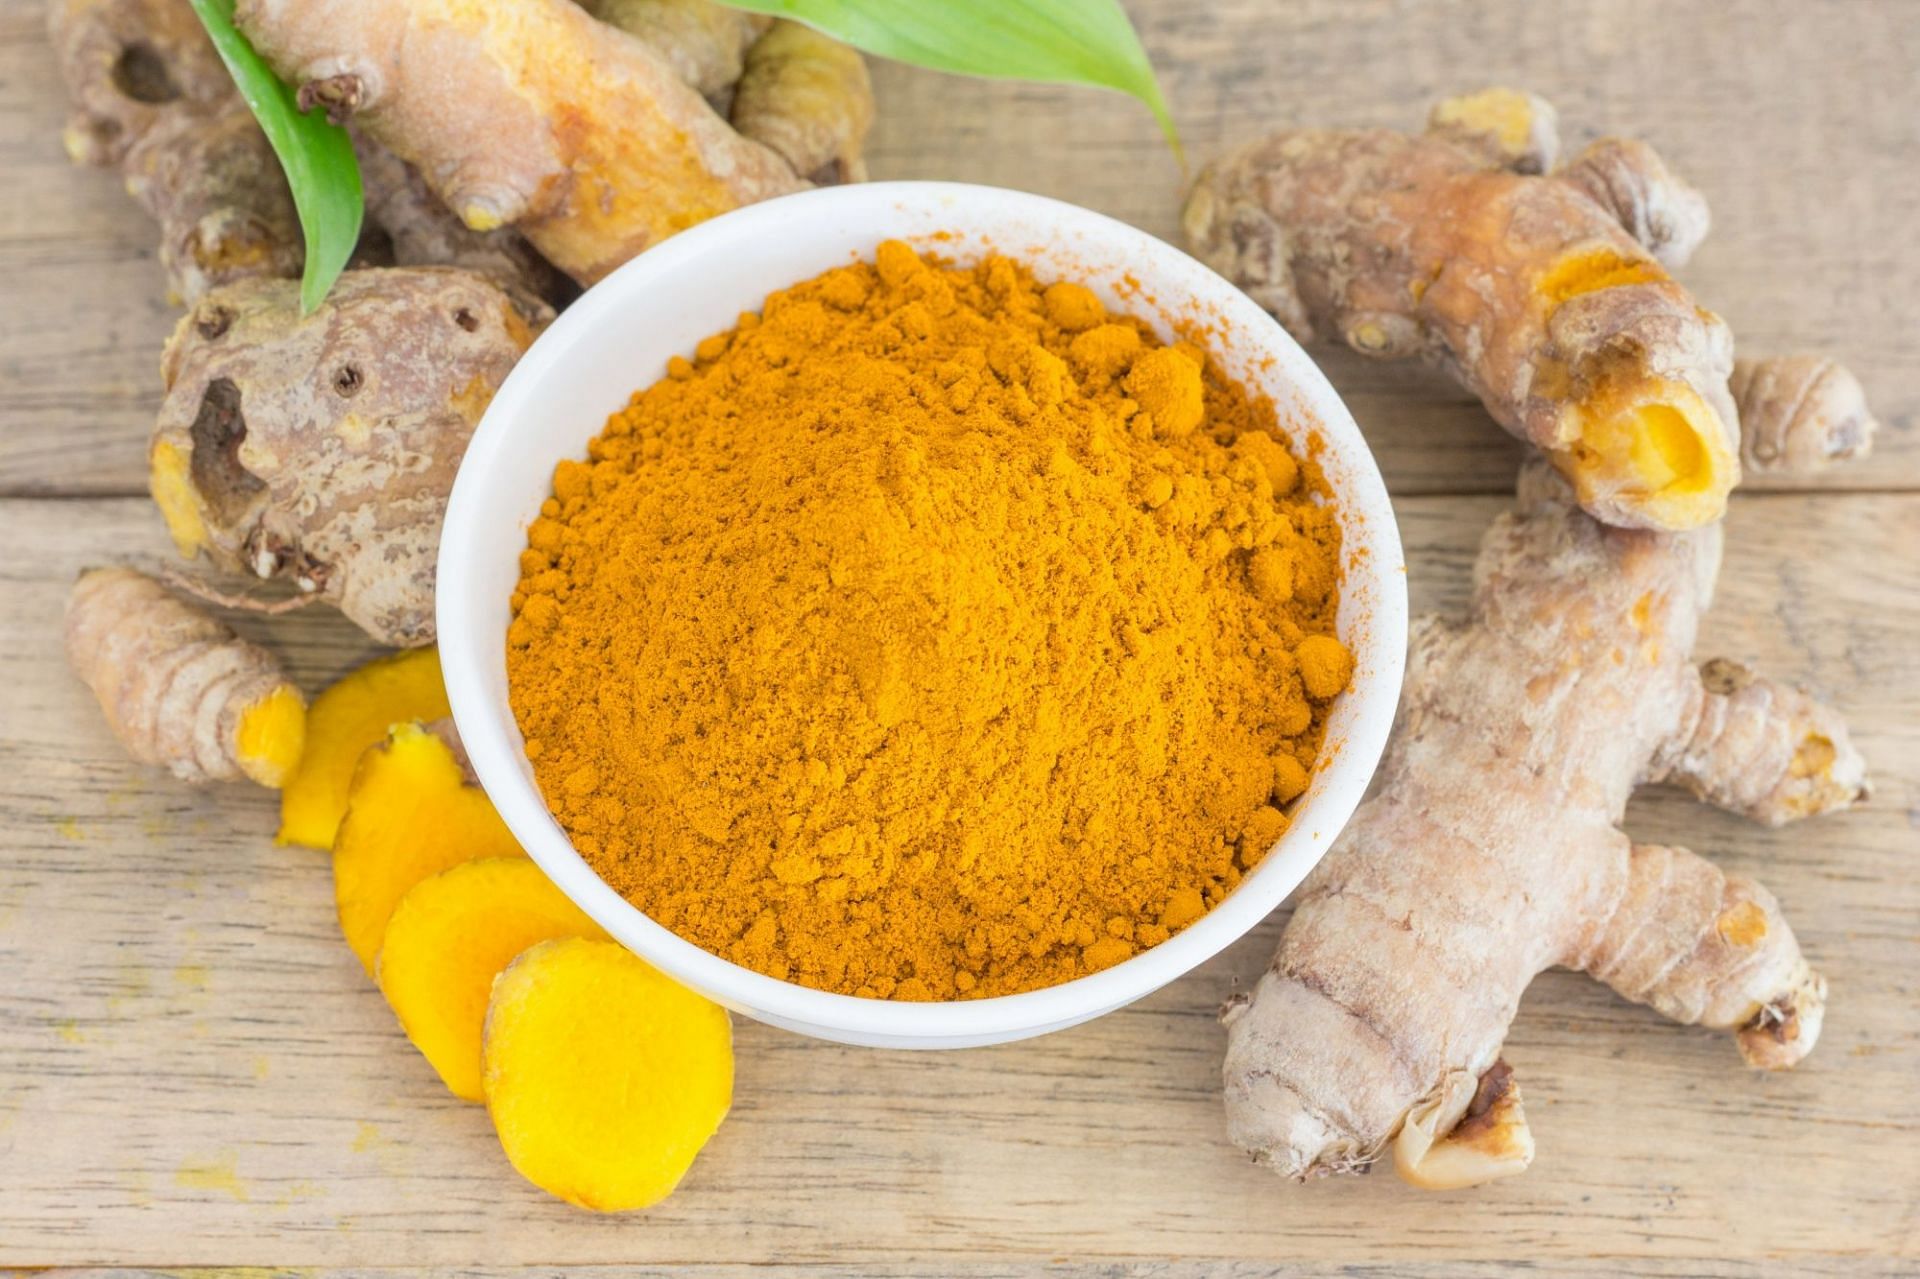 Turmeric is a common spice used in Indian households which can boost immunity (Image by Jigsawstocker on Freepik)